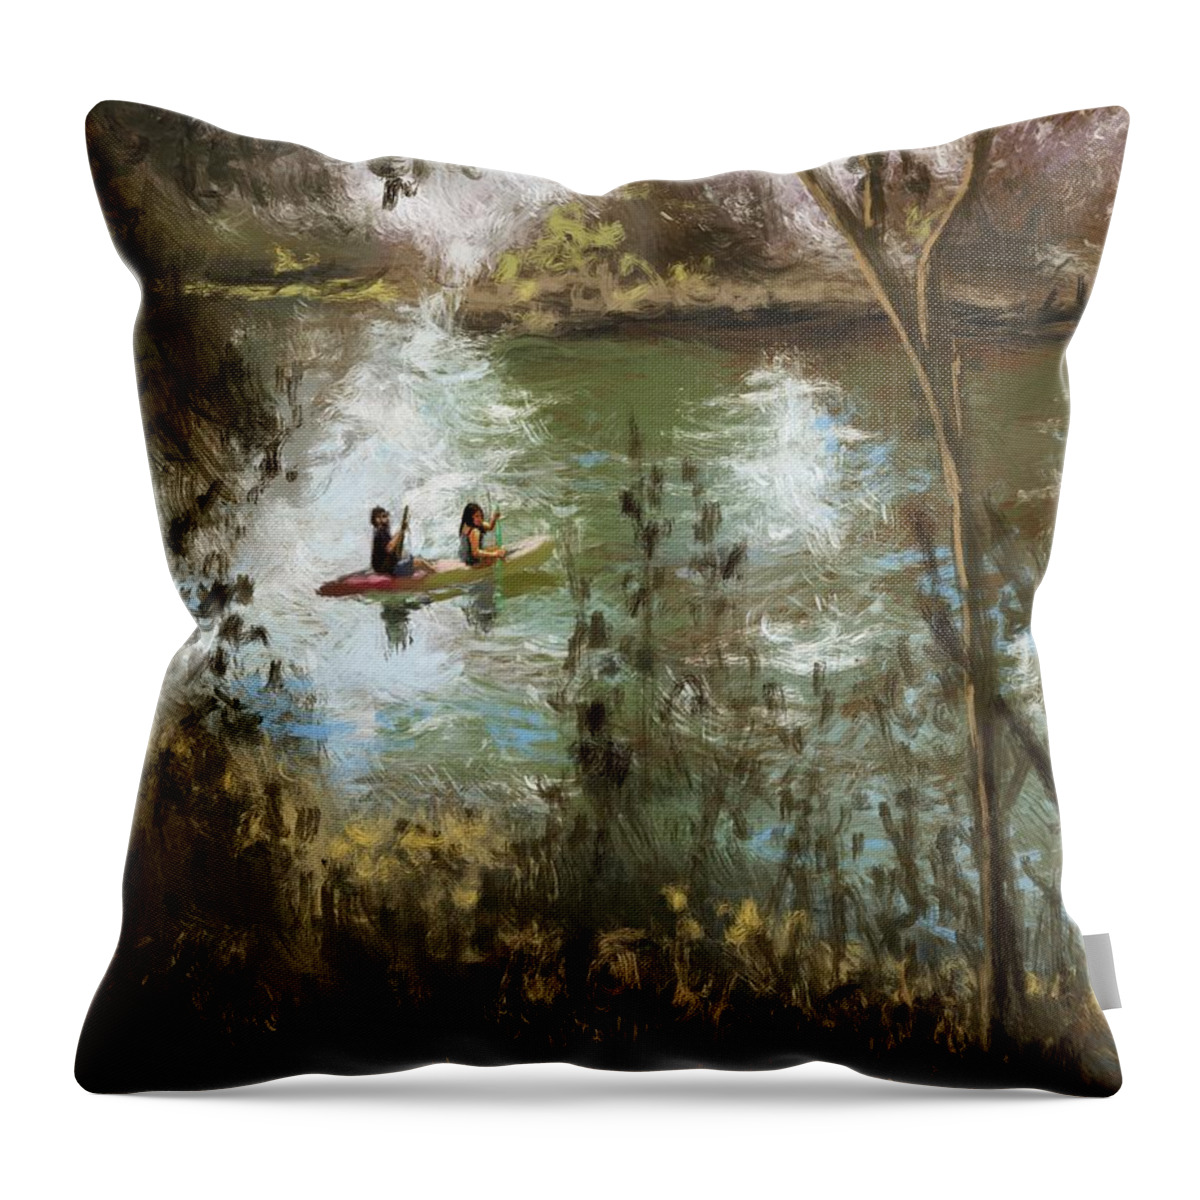 Kayak Throw Pillow featuring the painting Kayaking Three Sisters Springs by Larry Whitler